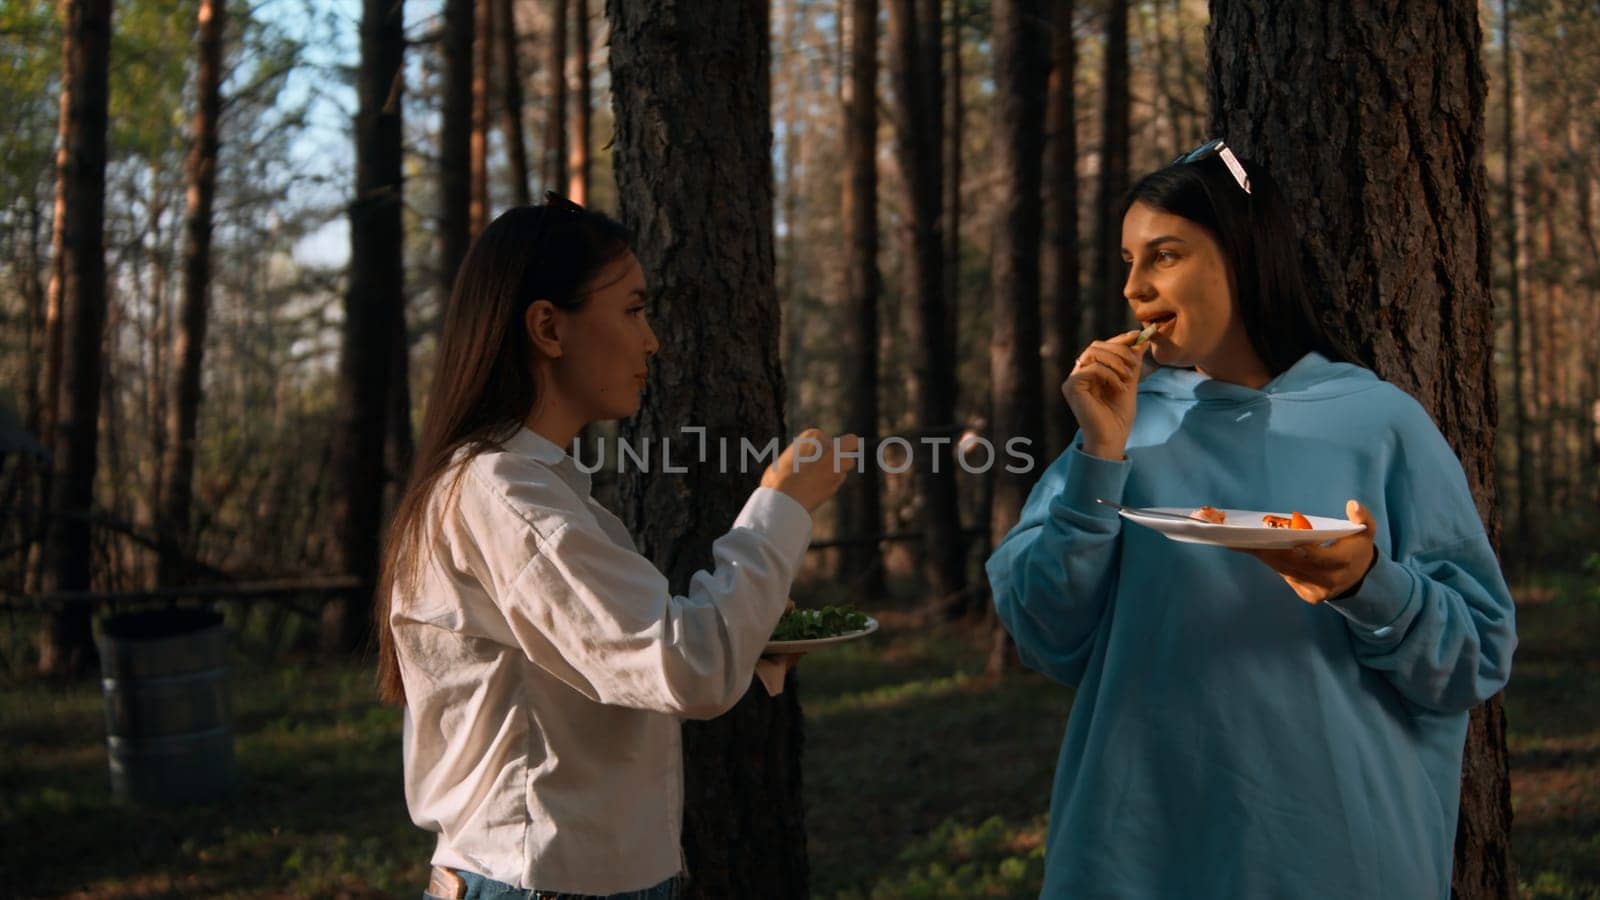 Barbecue on a summer day in coniferous forest. Stock footage. Two adult girls standing and communicating while eating